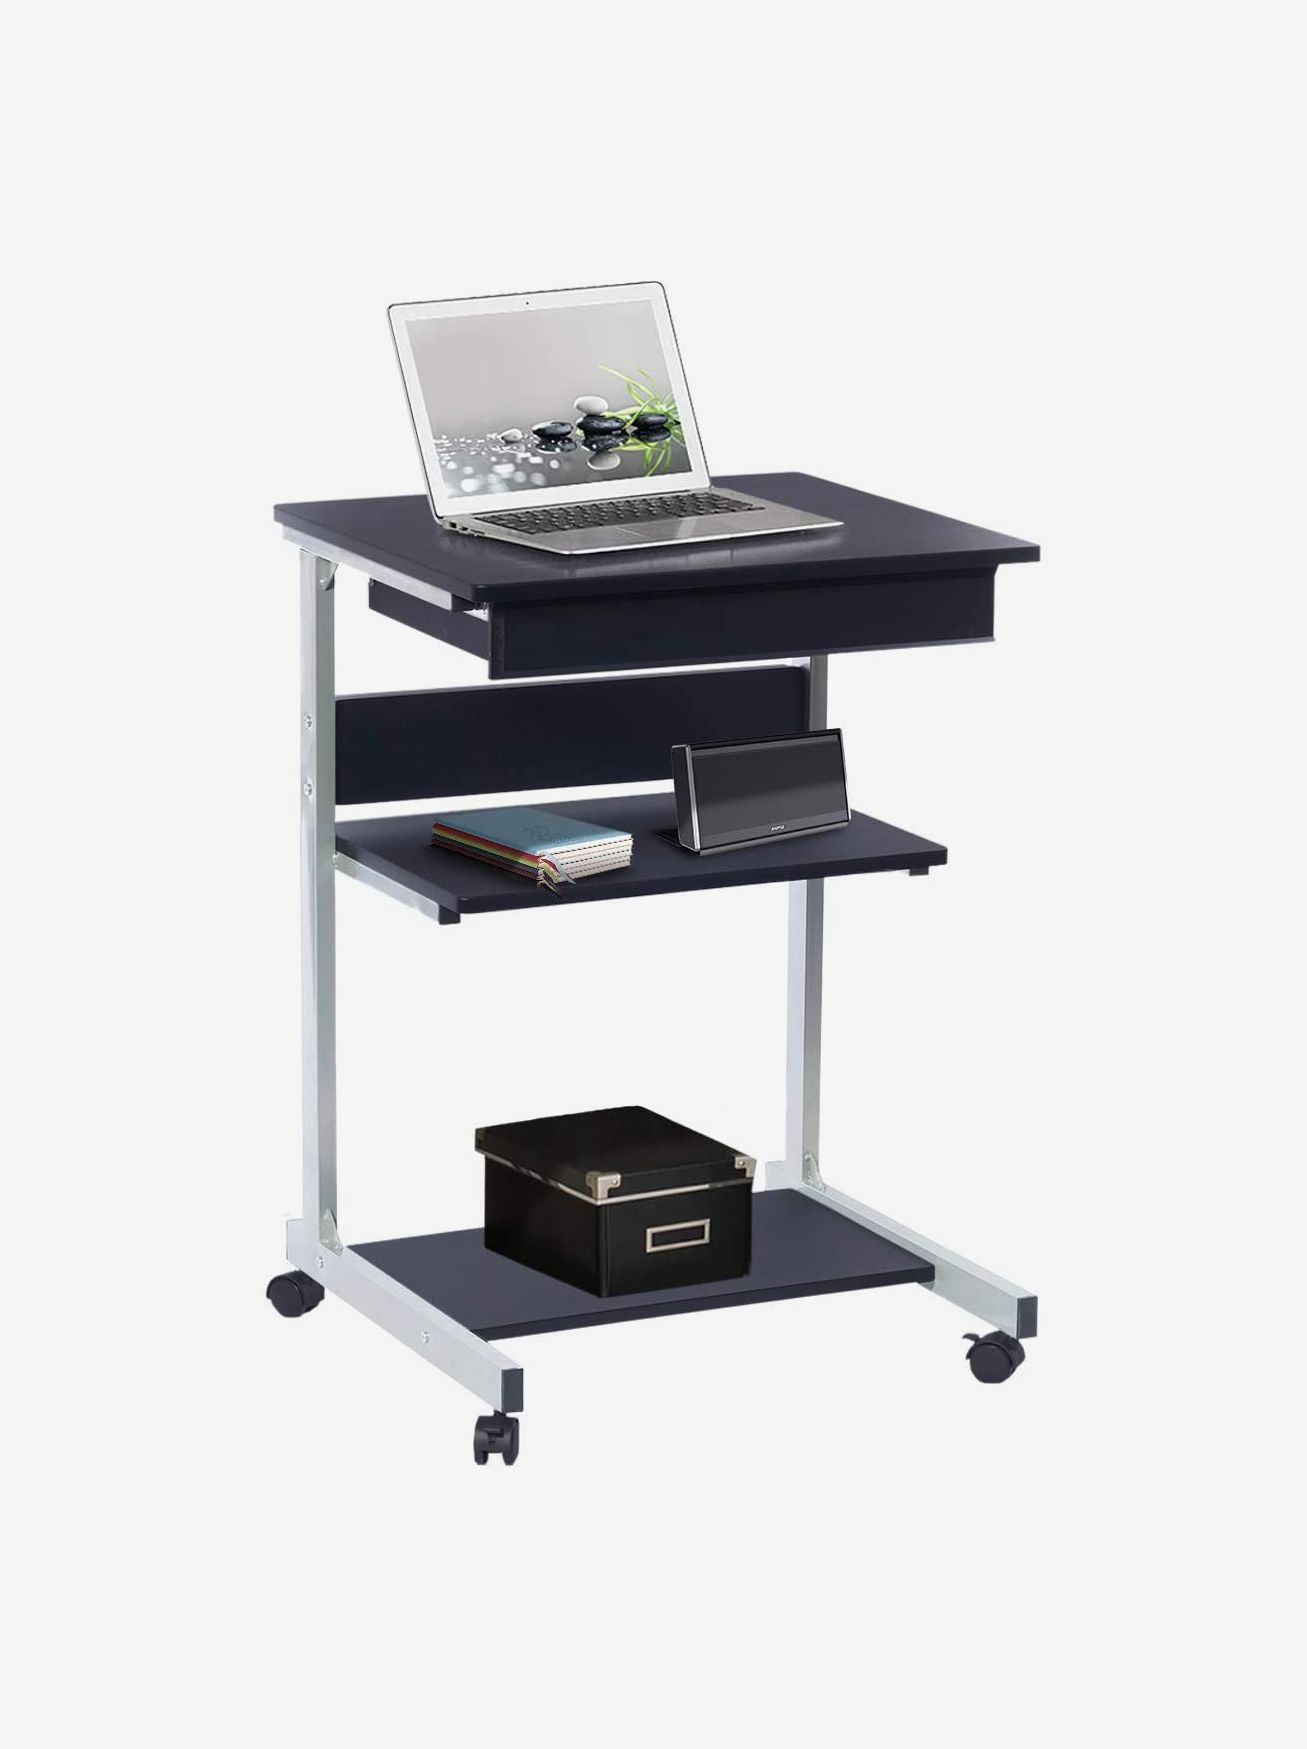 Laptop Table Computer Workstations Laptop Desk Easy to Move Lazy Lift Desk Simple Learning Writing Desk